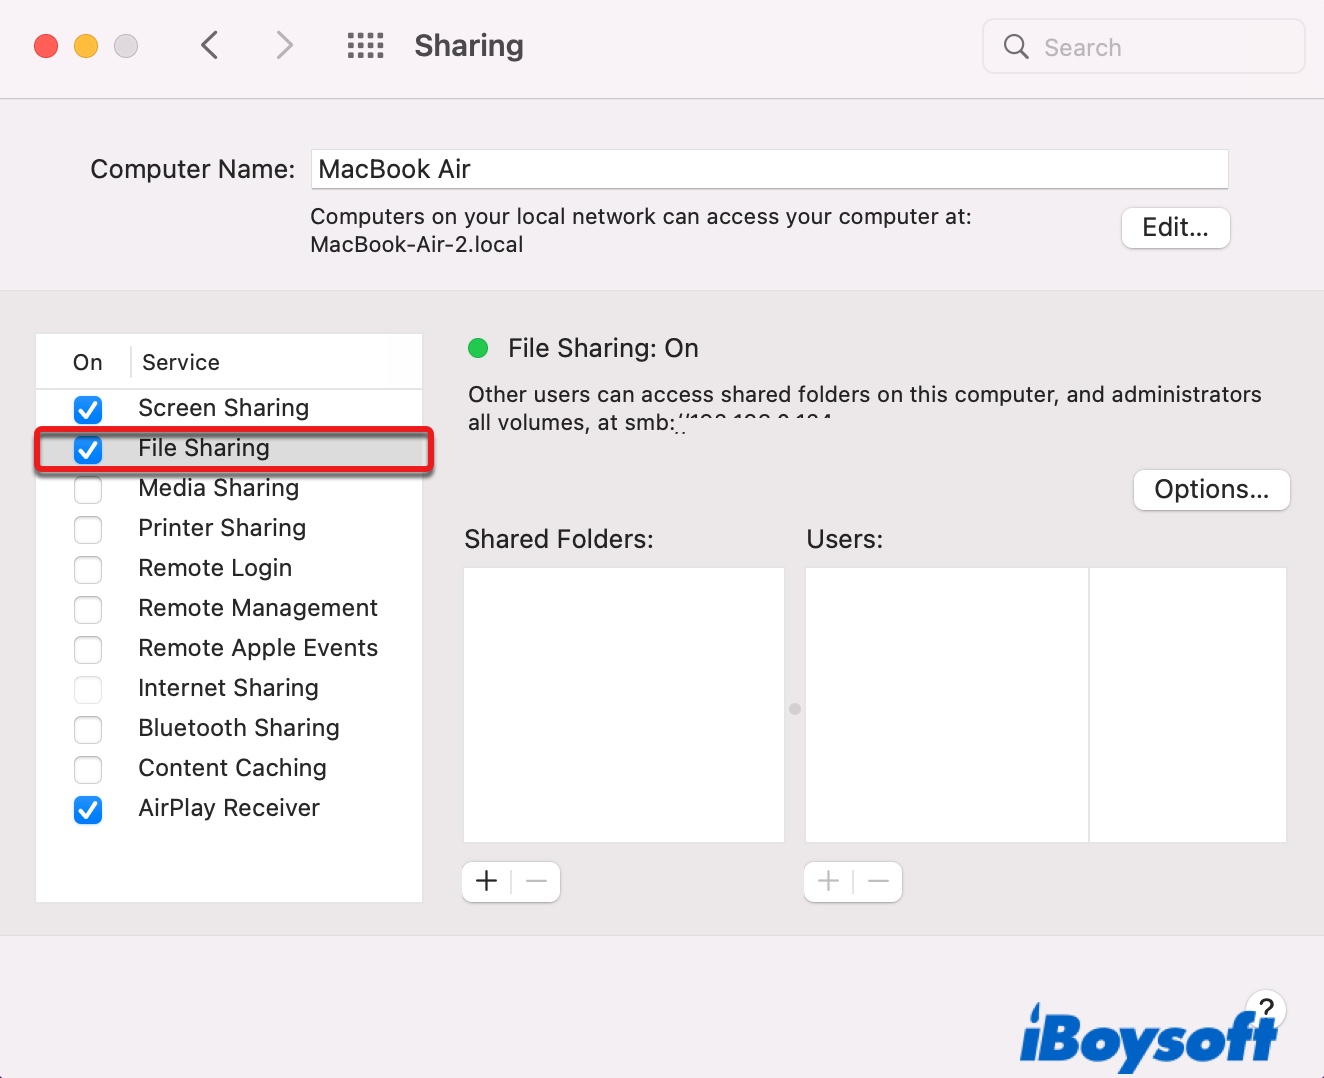 Enable File Sharing on Mac